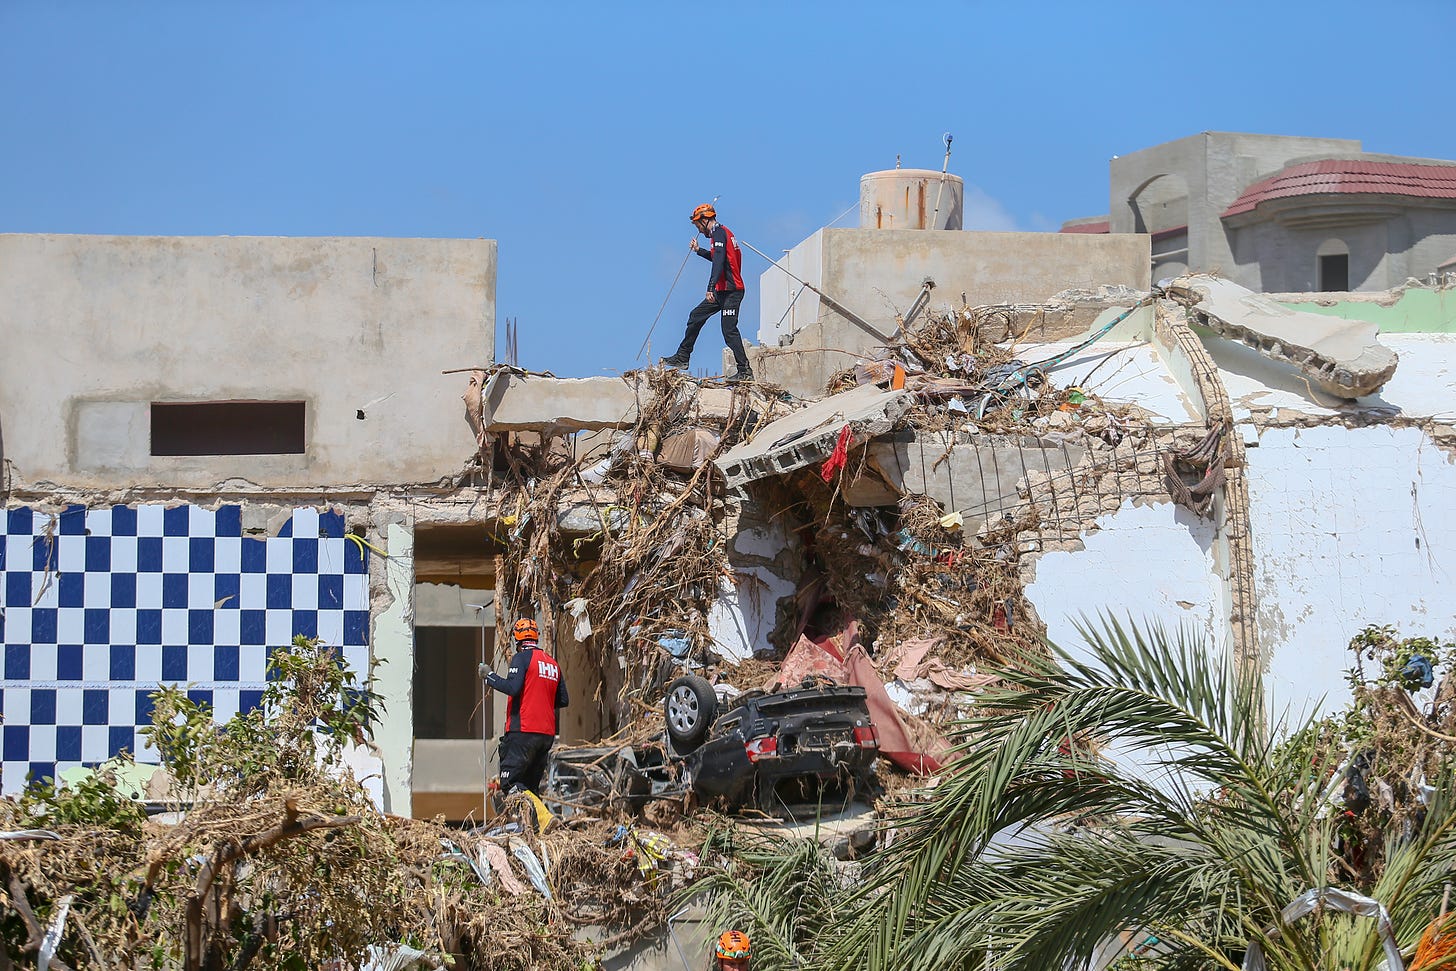 Turkiye’s State Disaster and Emergency Management Authority, along with the teams from Russia, Spain, Italy, Tunisia, Algeria and UAE conduct search and rescue operations in the aftermath of severe flooding caused by Storm Daniel in Derna, Libya on Sept. 19, 2023. Credit: Halil Fidan/Anadolu Agency via Getty Images